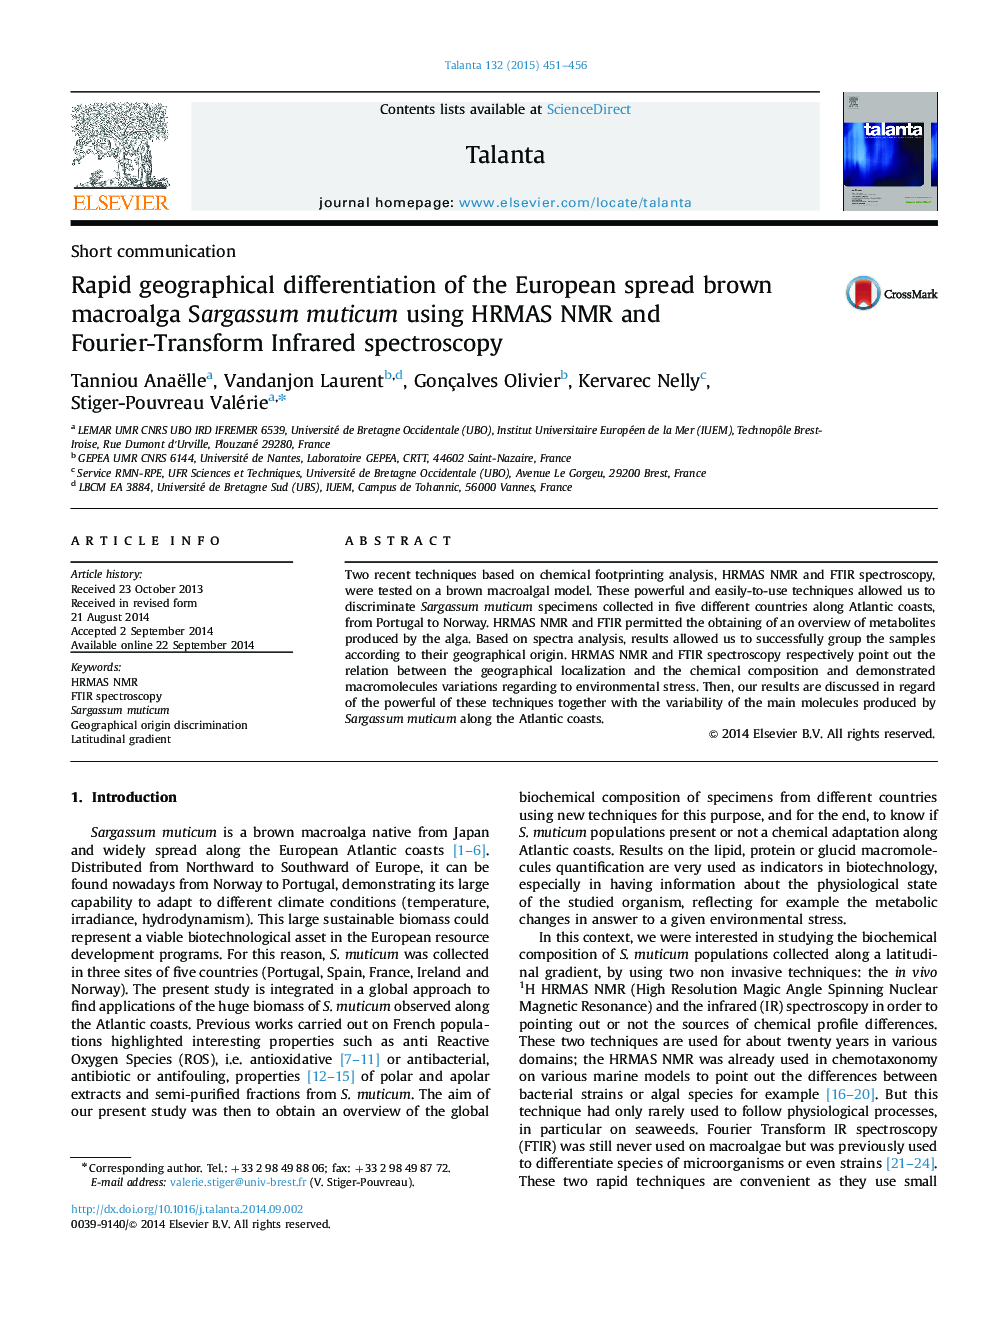 Rapid geographical differentiation of the European spread brown macroalga Sargassum muticum using HRMAS NMR and Fourier-Transform Infrared spectroscopy